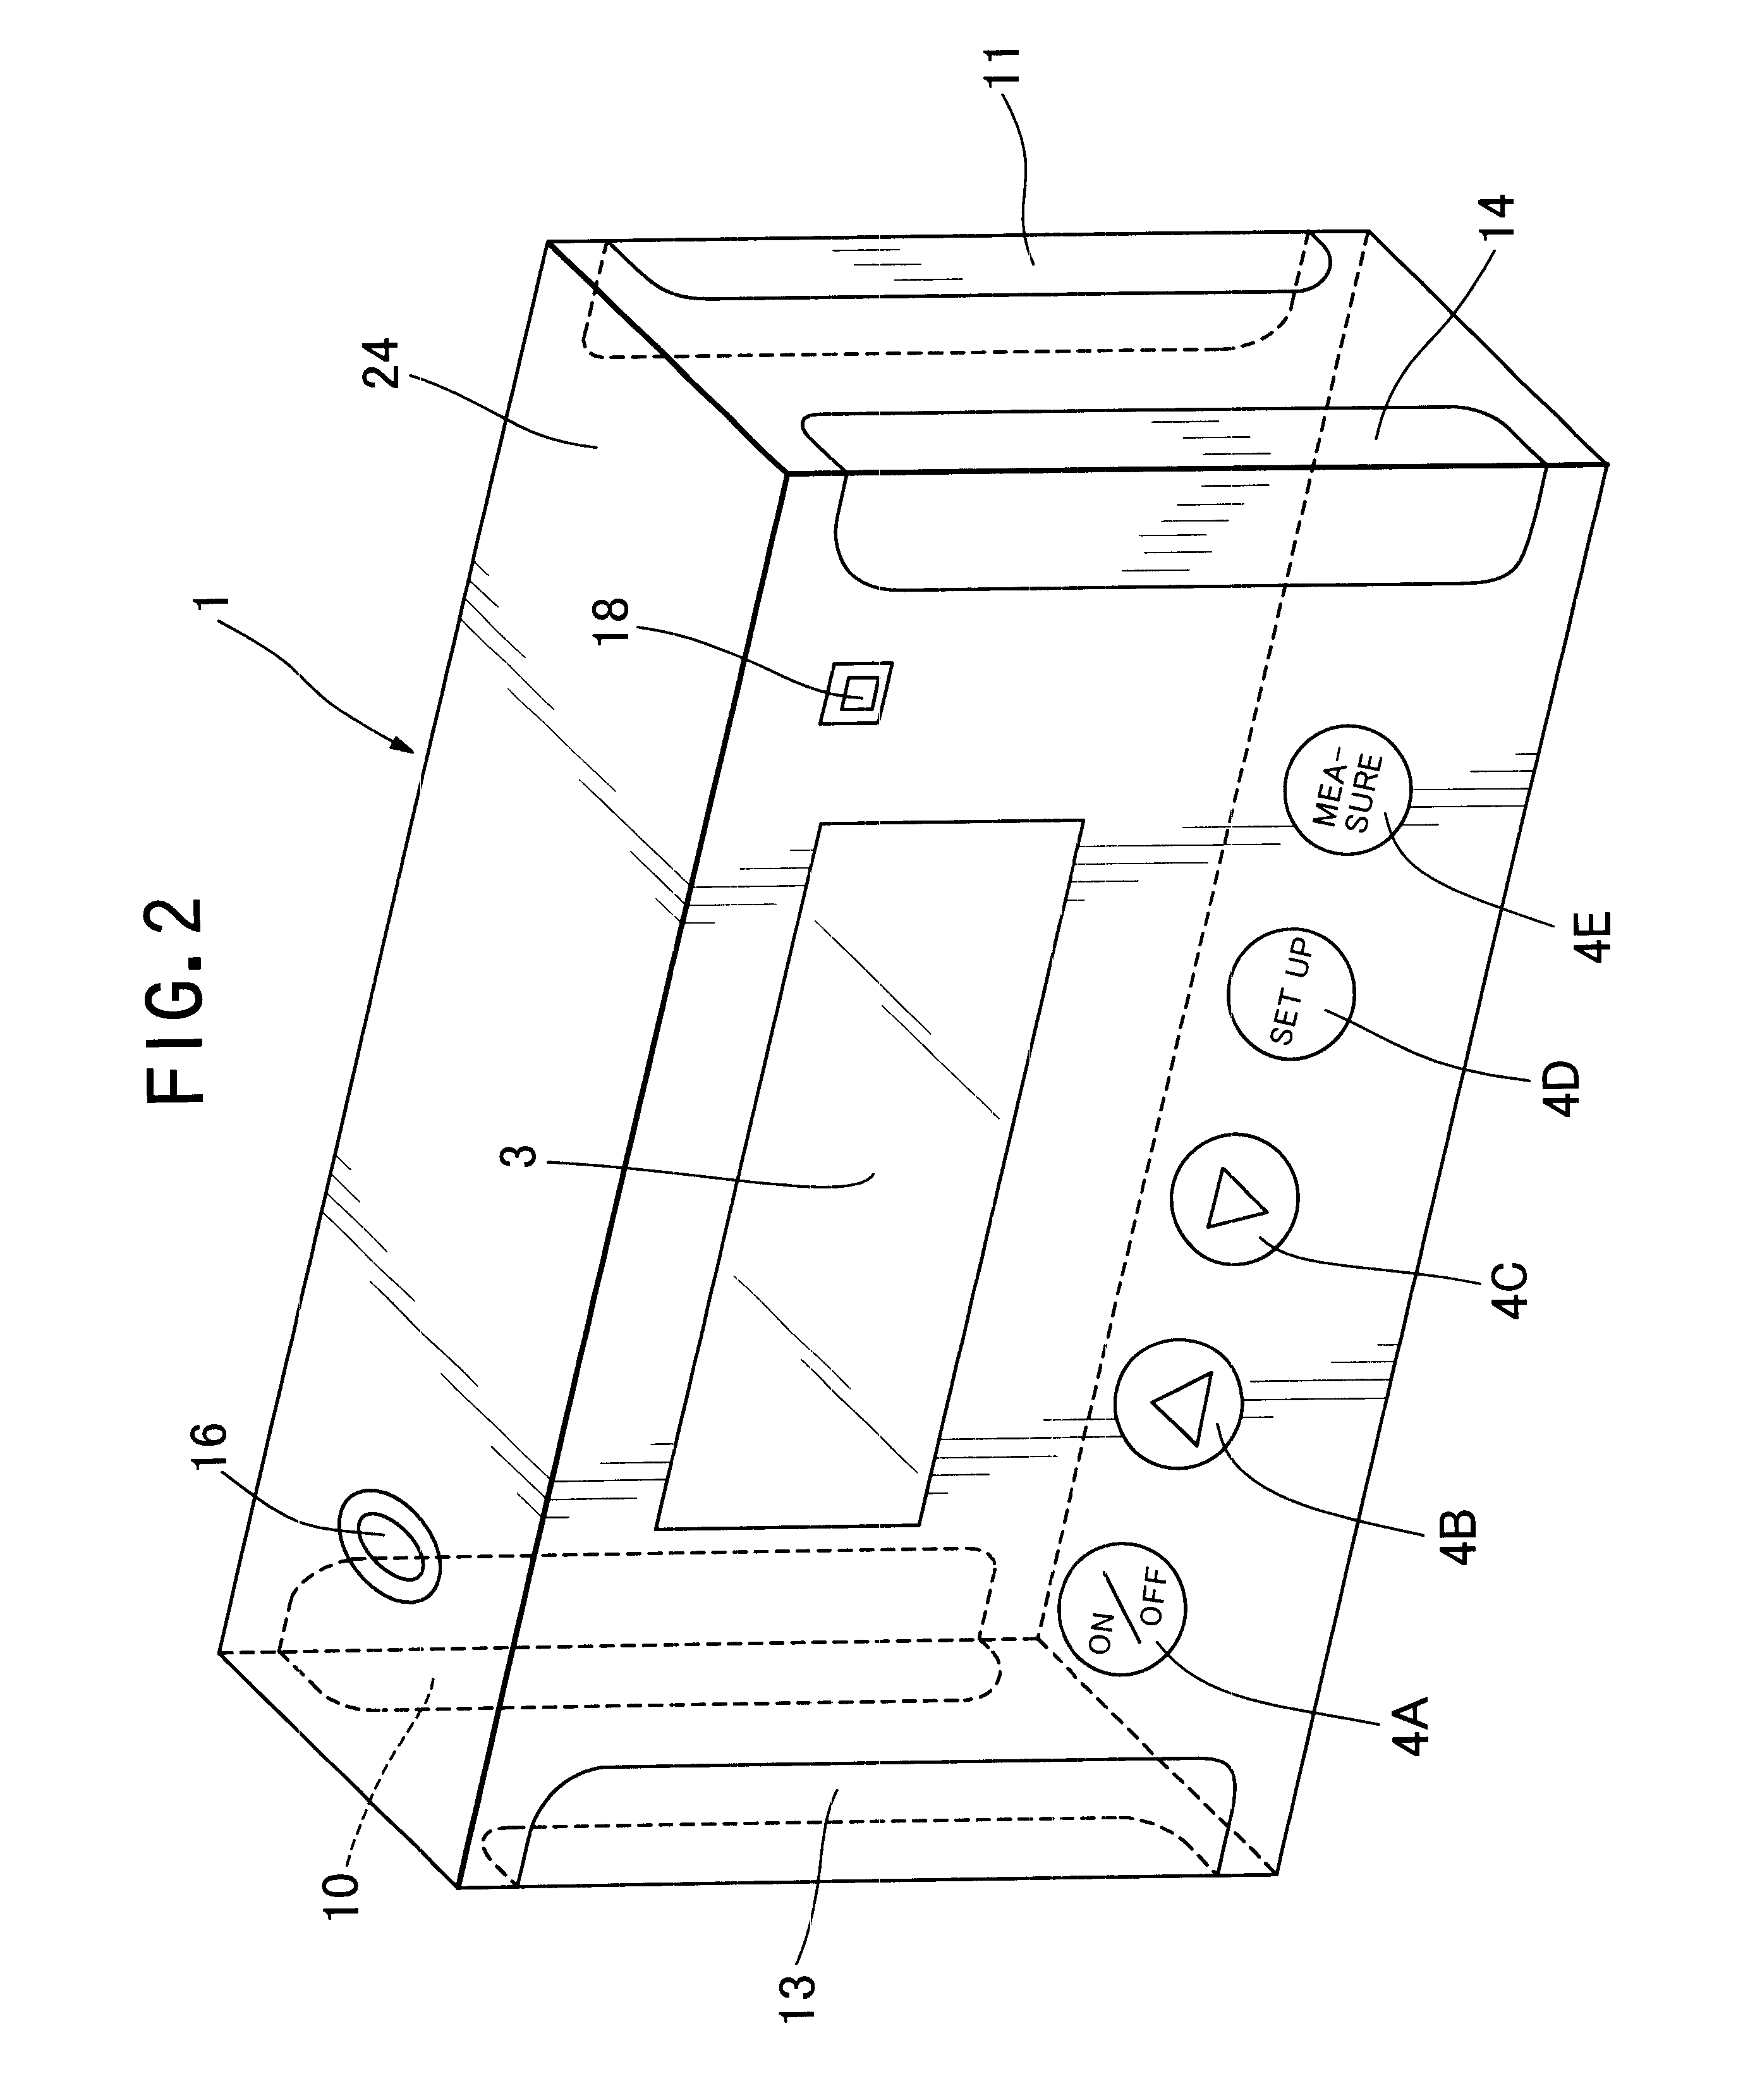 Dehydration condition judging apparatus by measuring bioelectric impedance